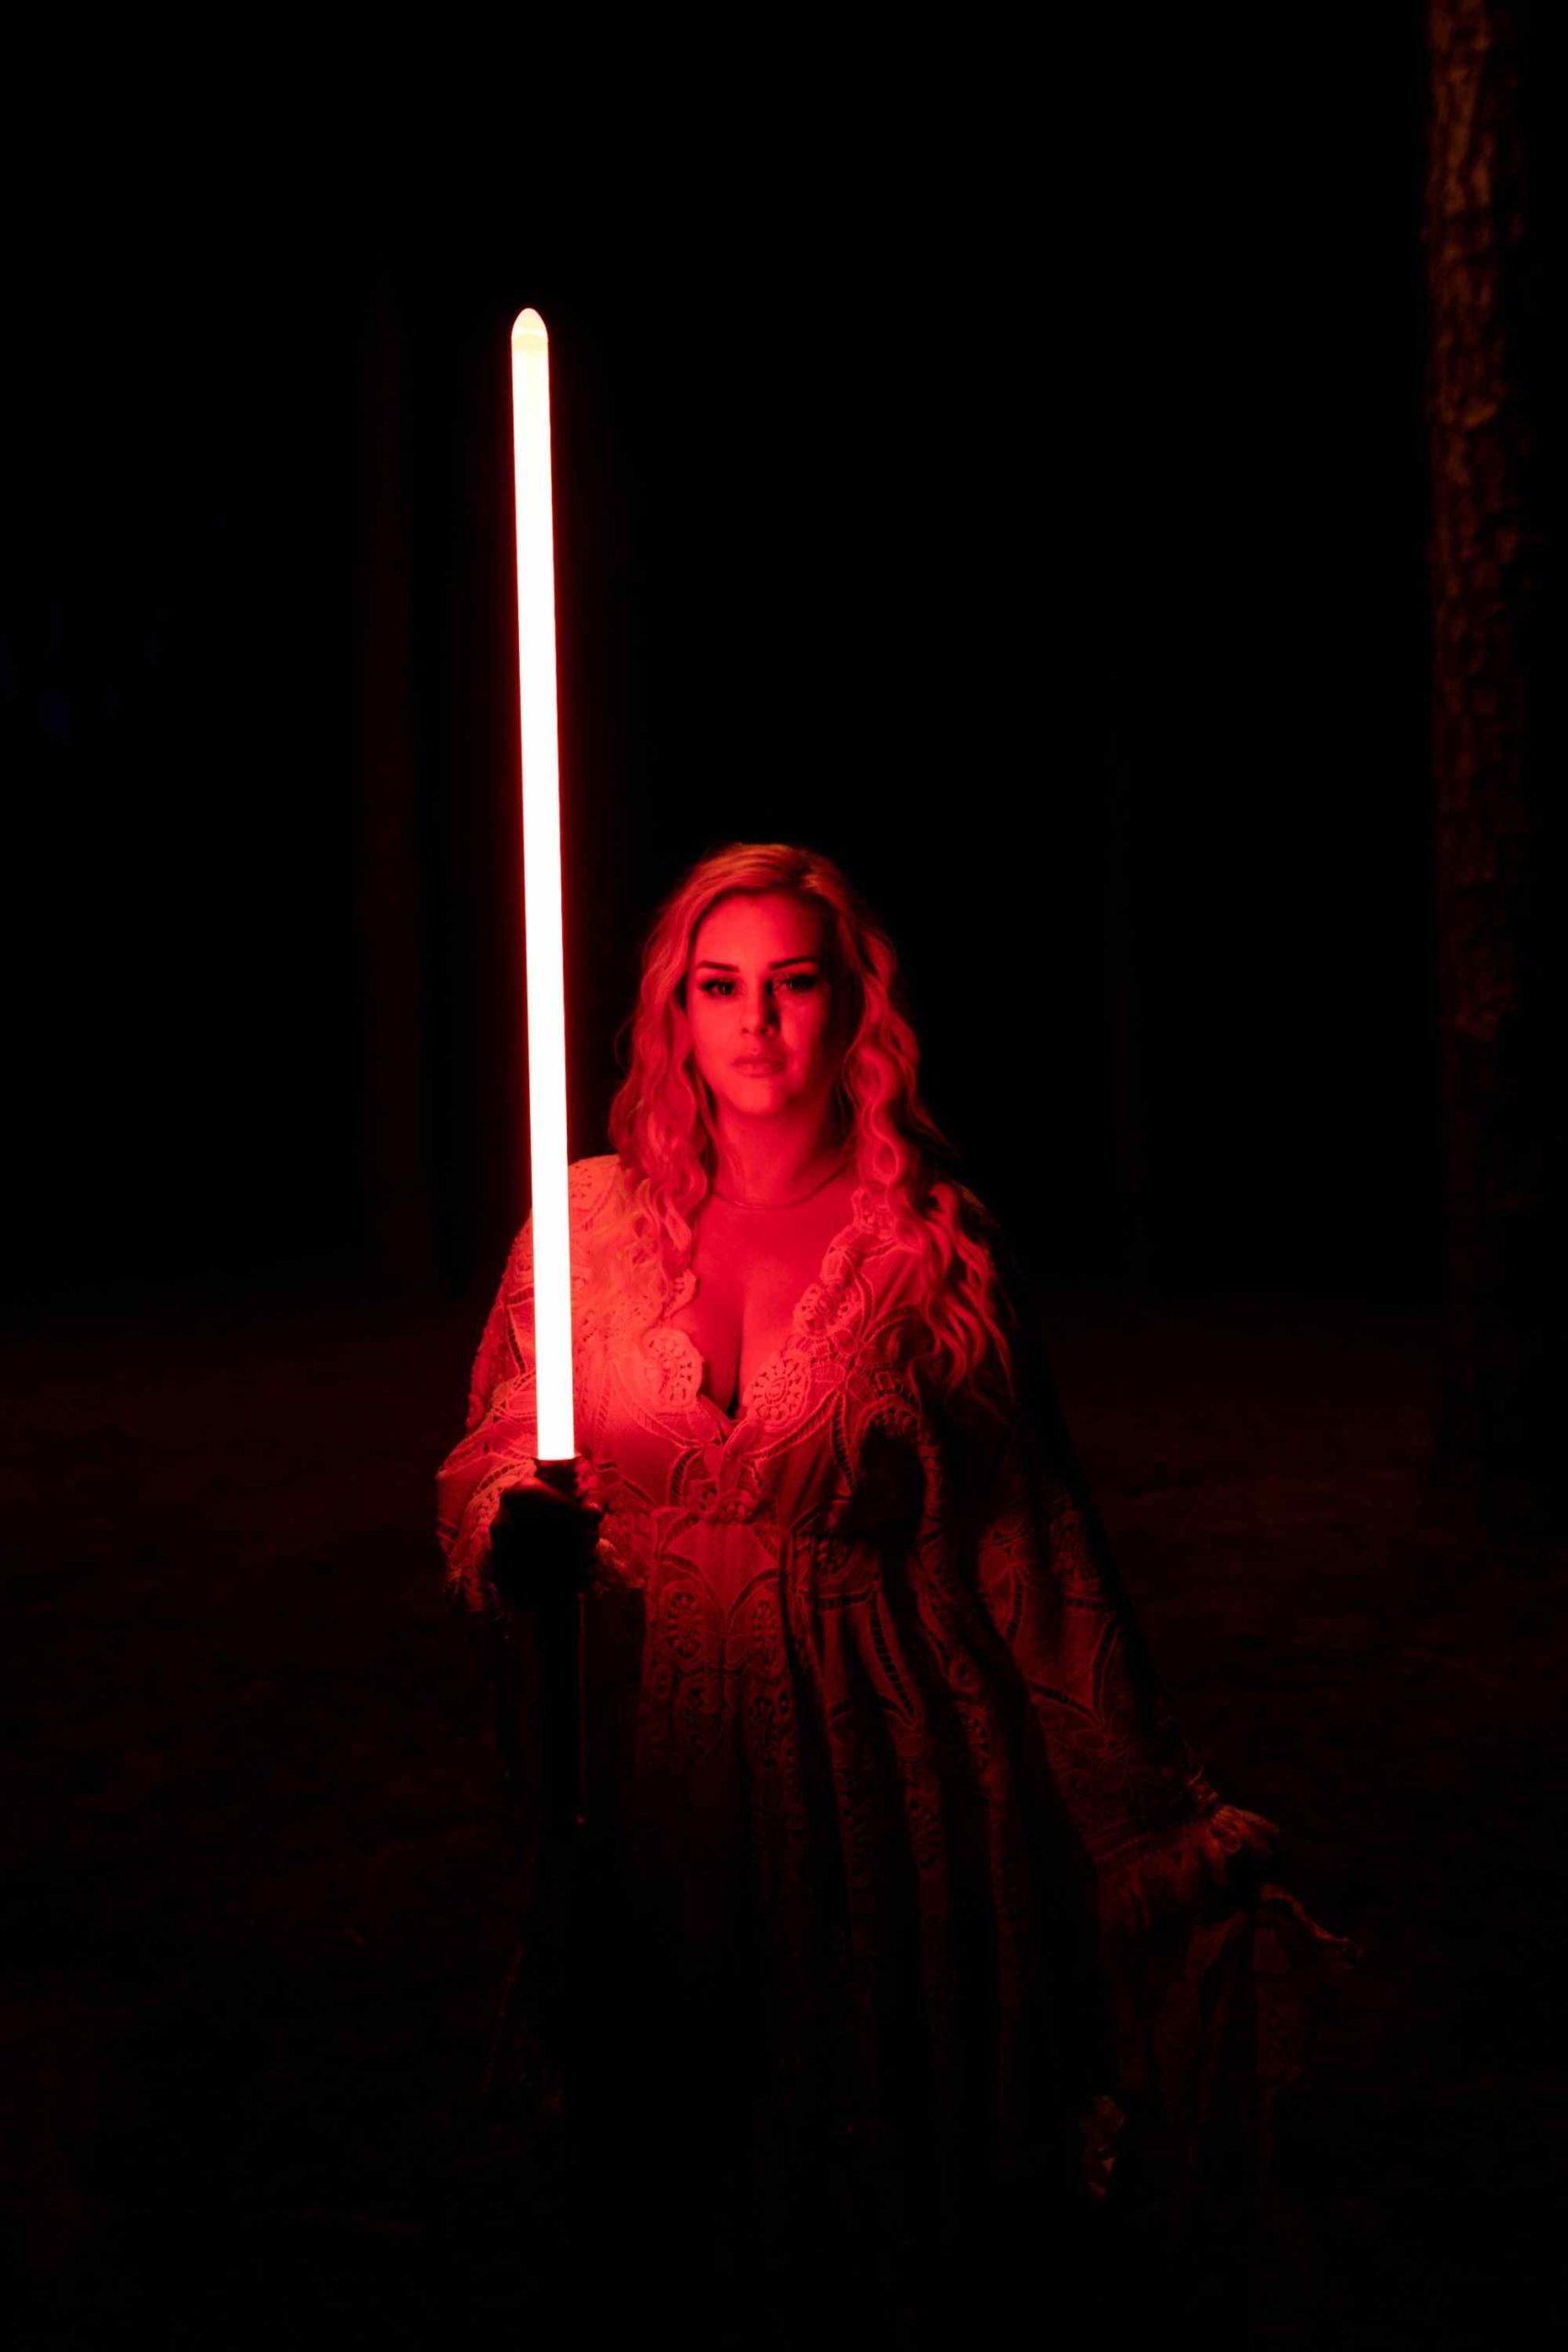 woman holding a lightsaber in the dark